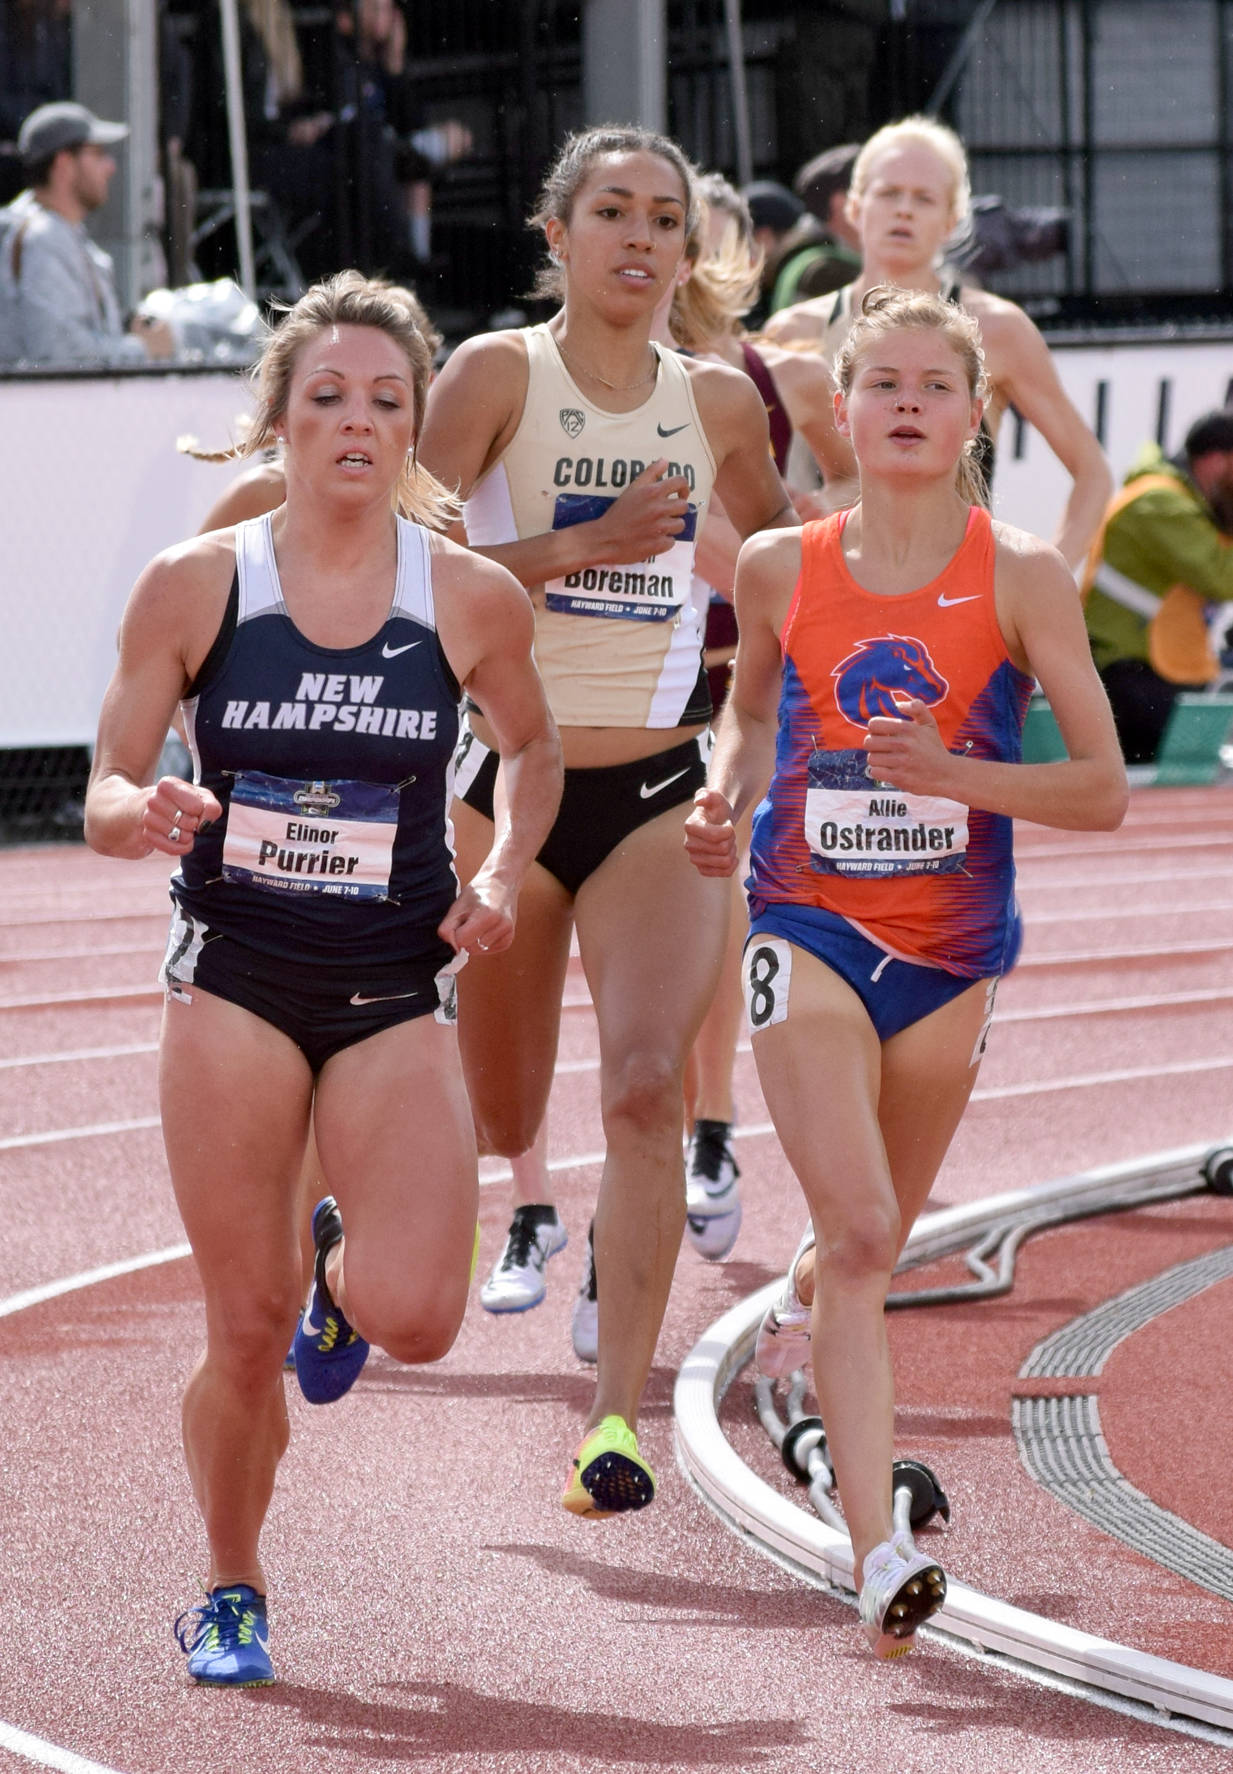 Boise State redshirt freshman Allie Ostrander (8) runs with New Hampshire’s Elinor Purrier on Saturday, June 10, 2017, in the 3,000-meter steeplechase at the NCAA Outdoor Track and Field Championships at Hayward Field in Eugene, Oregon. Ostrander won the race, while Purrier was fourth. (Photo provided by Boise State Sports Information)